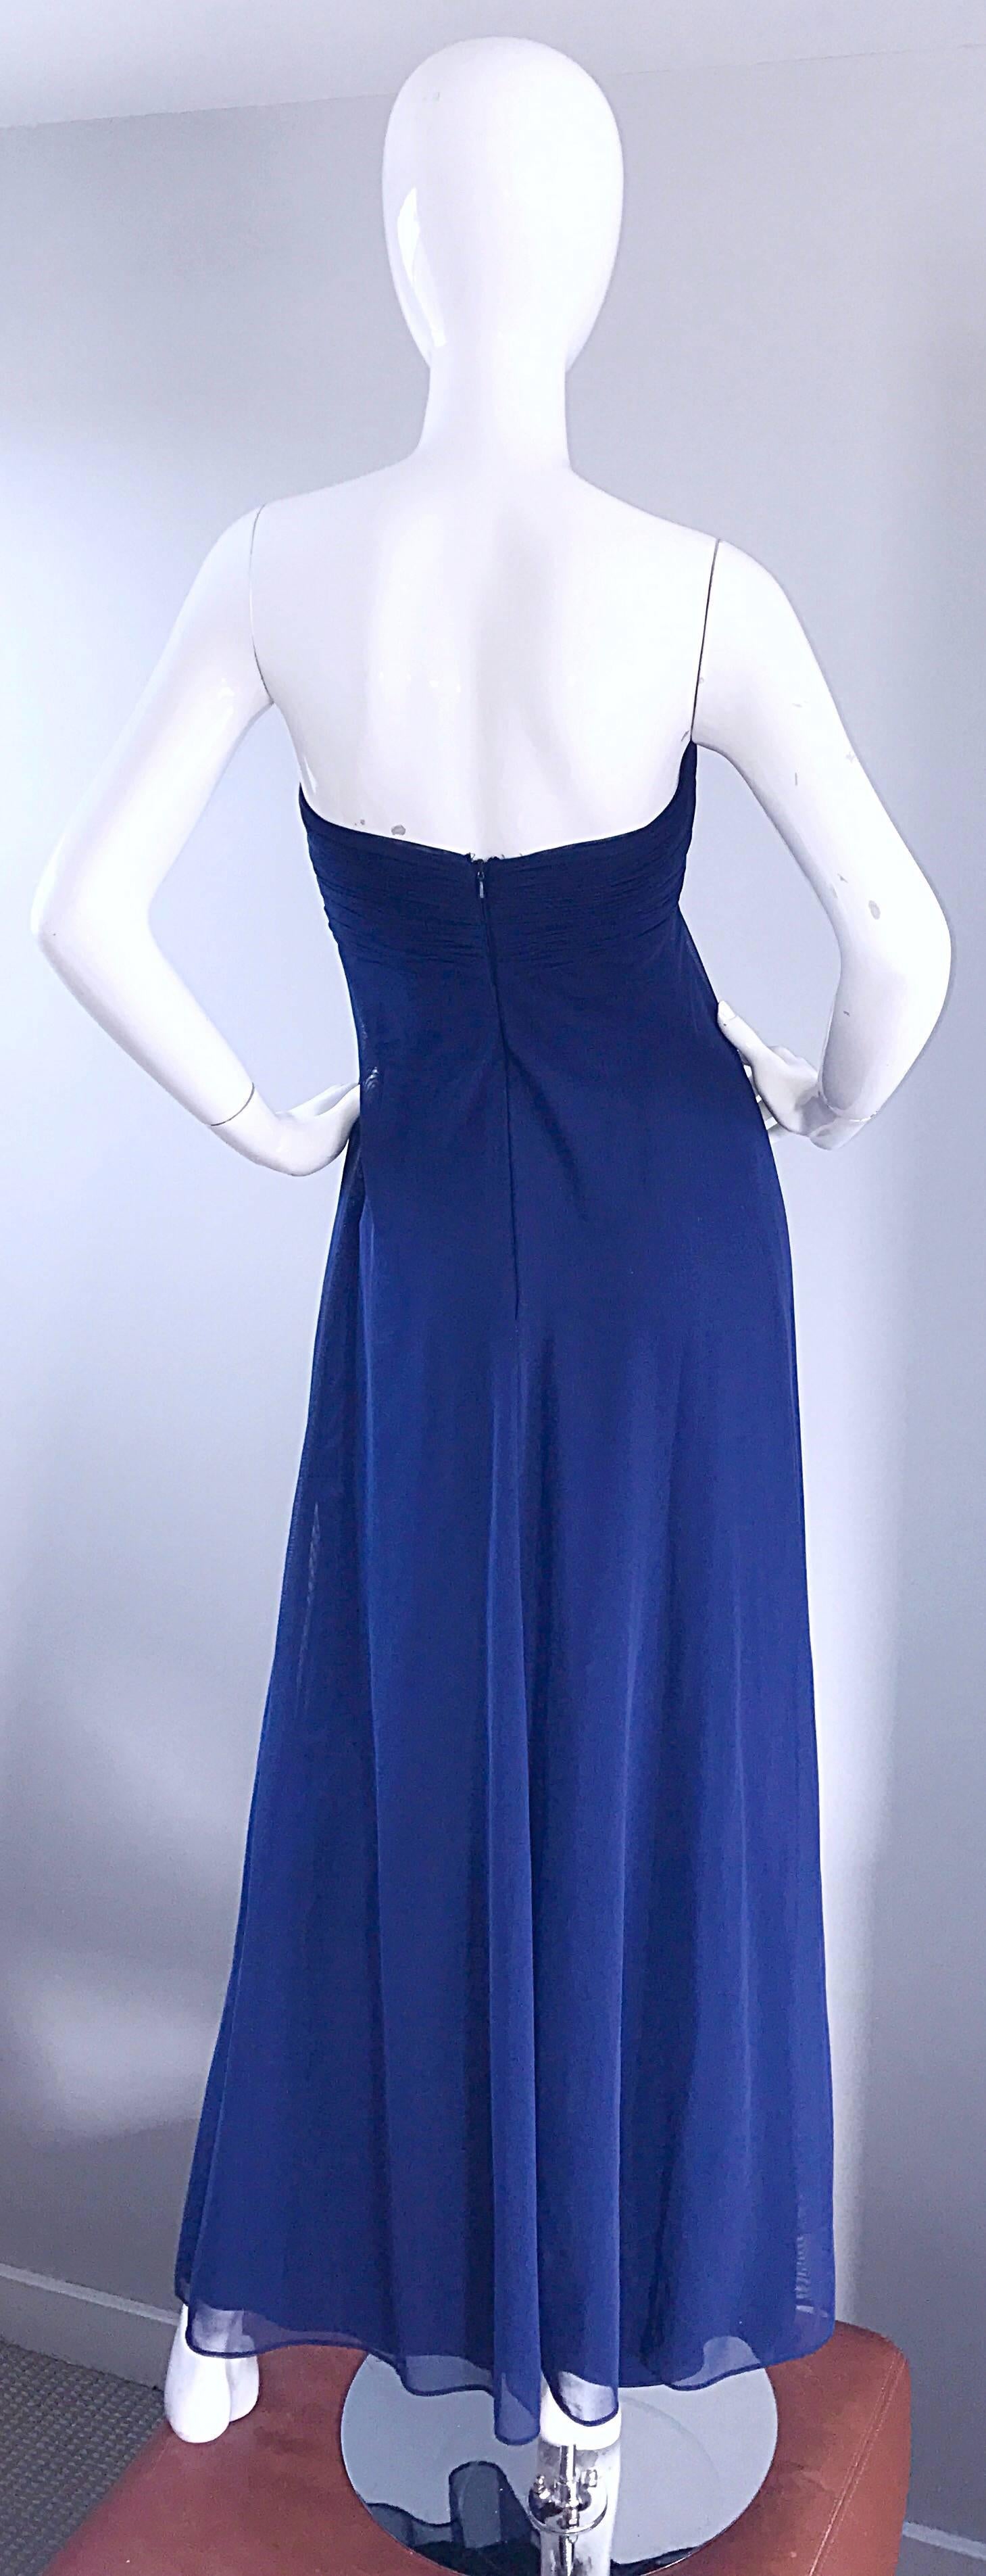 Vintage Vicky Tiel Couture Navy Blue Strapless Silk and Mesh Gown Evening Dress In Excellent Condition For Sale In San Diego, CA